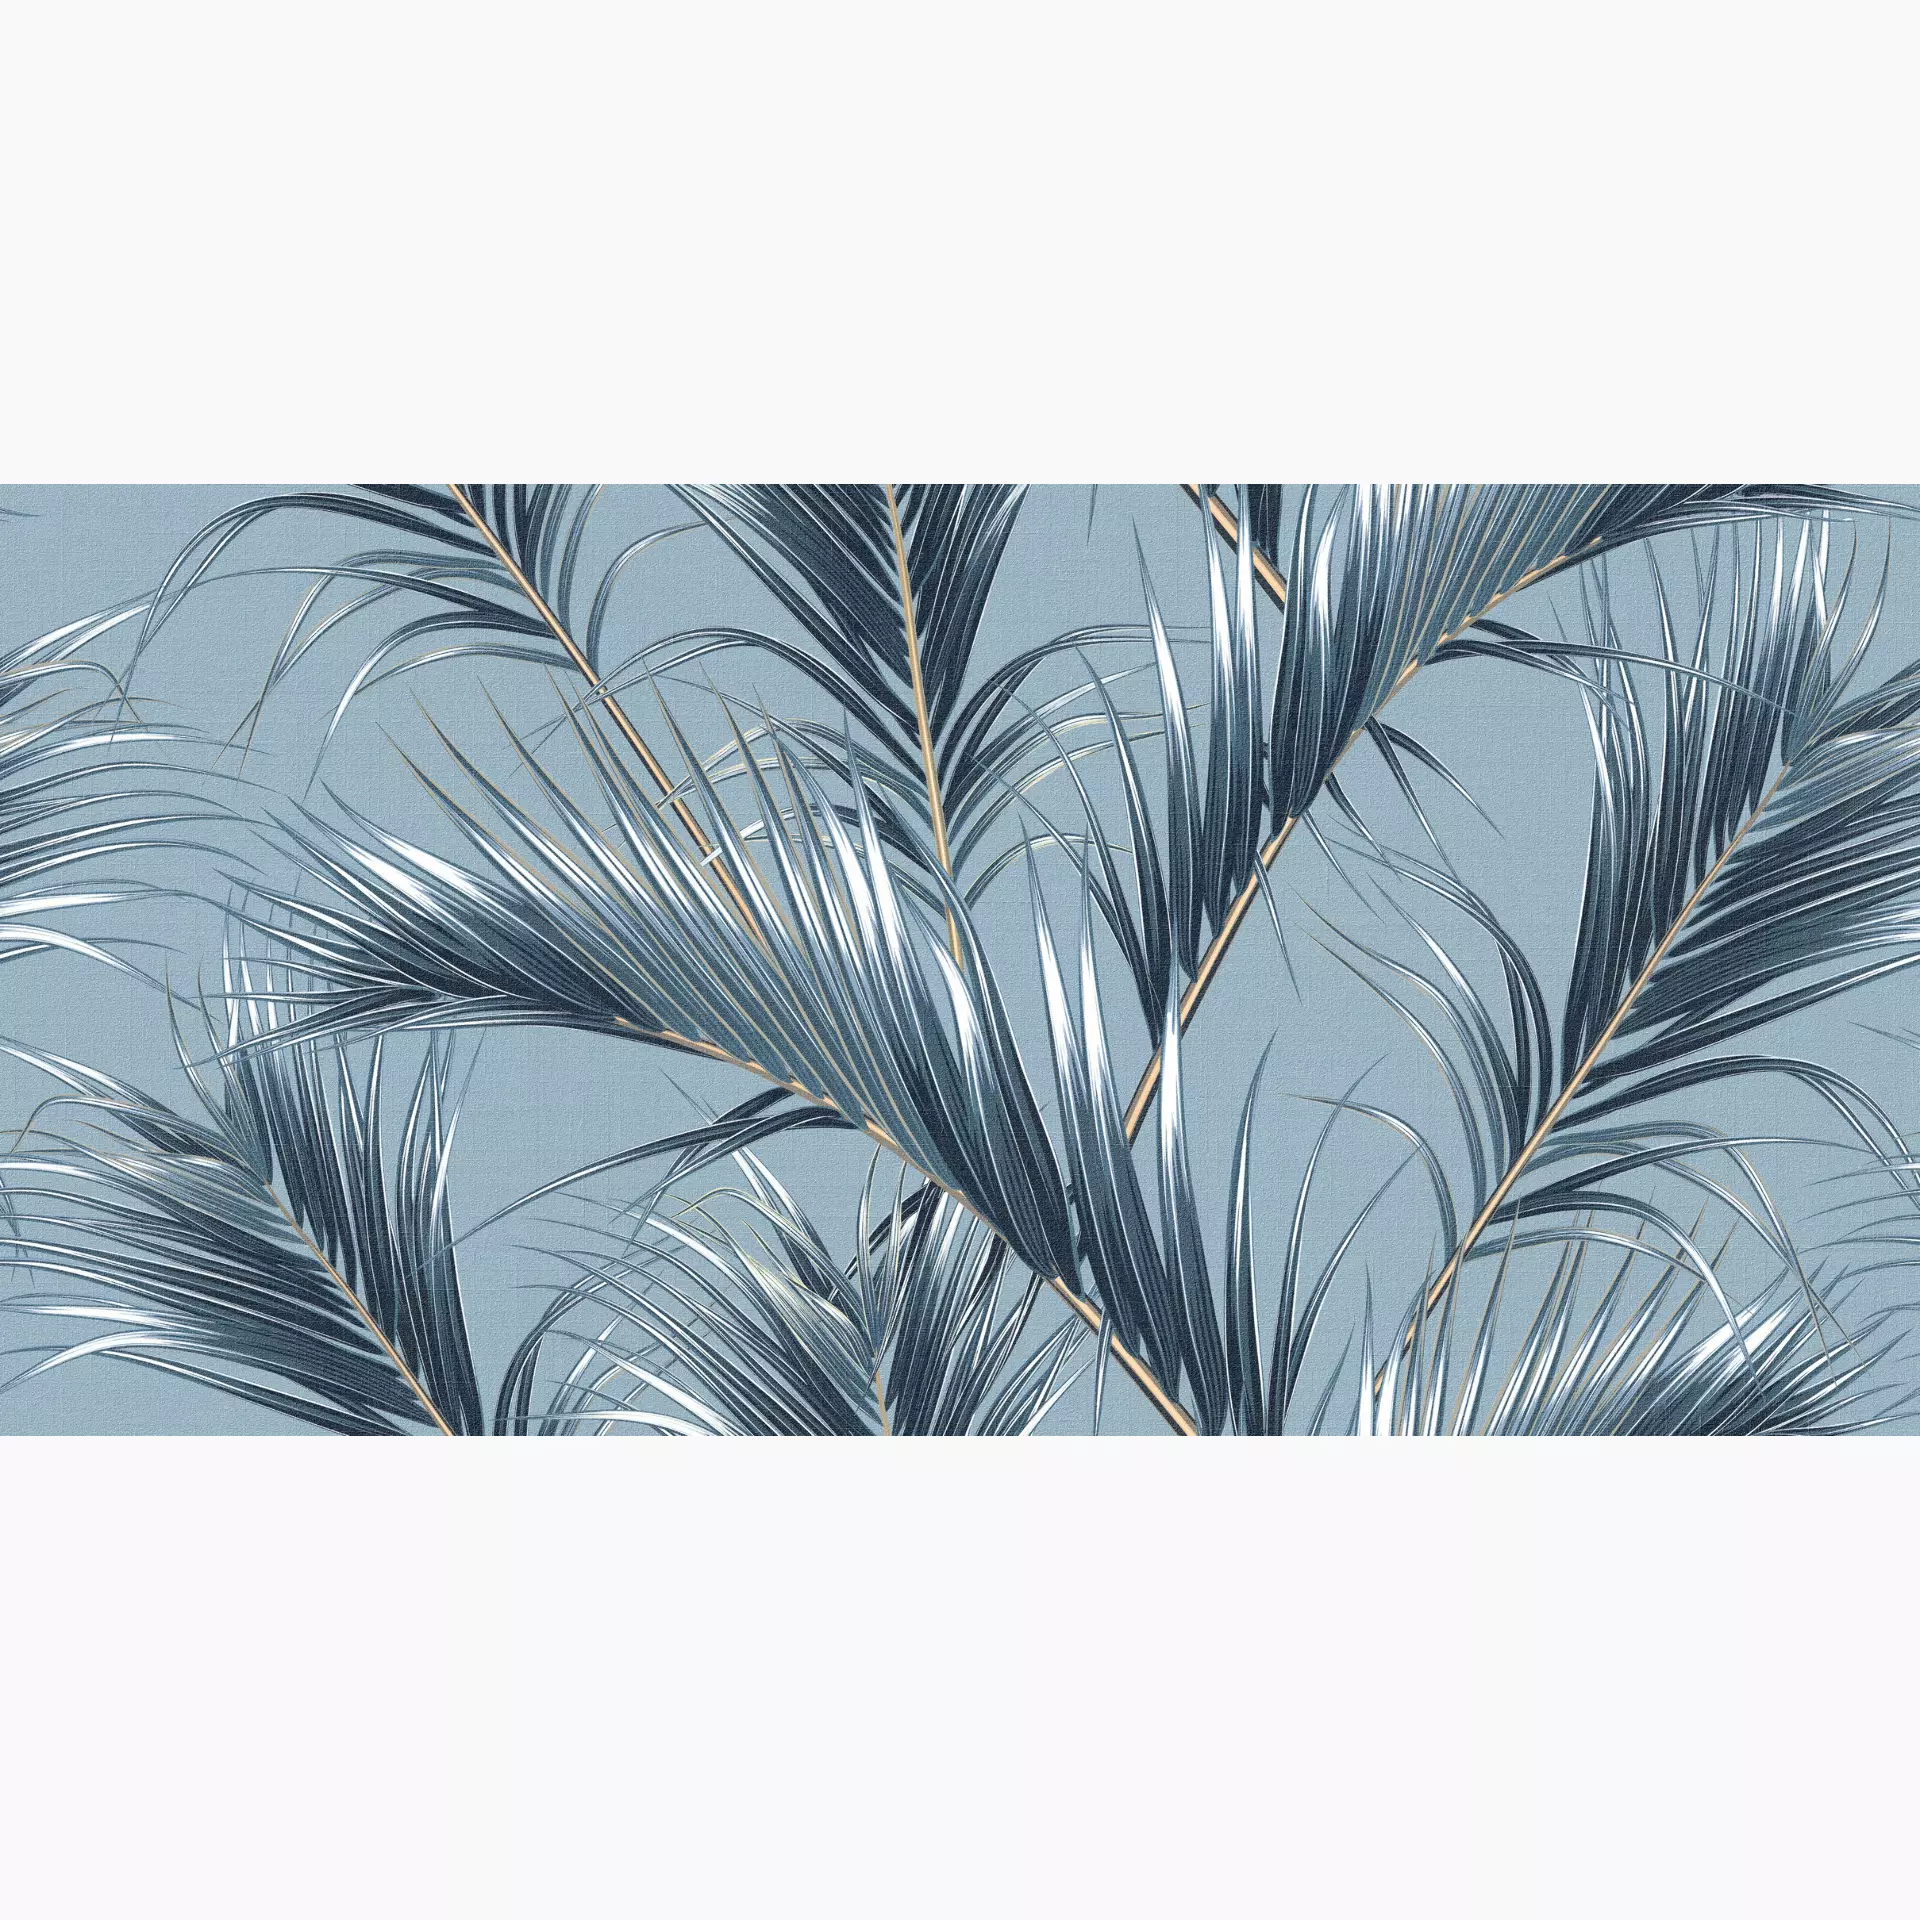 ABK Wide & Style Mini Palm Naturale Decor PF60008437 60x120cm rectified 7mm